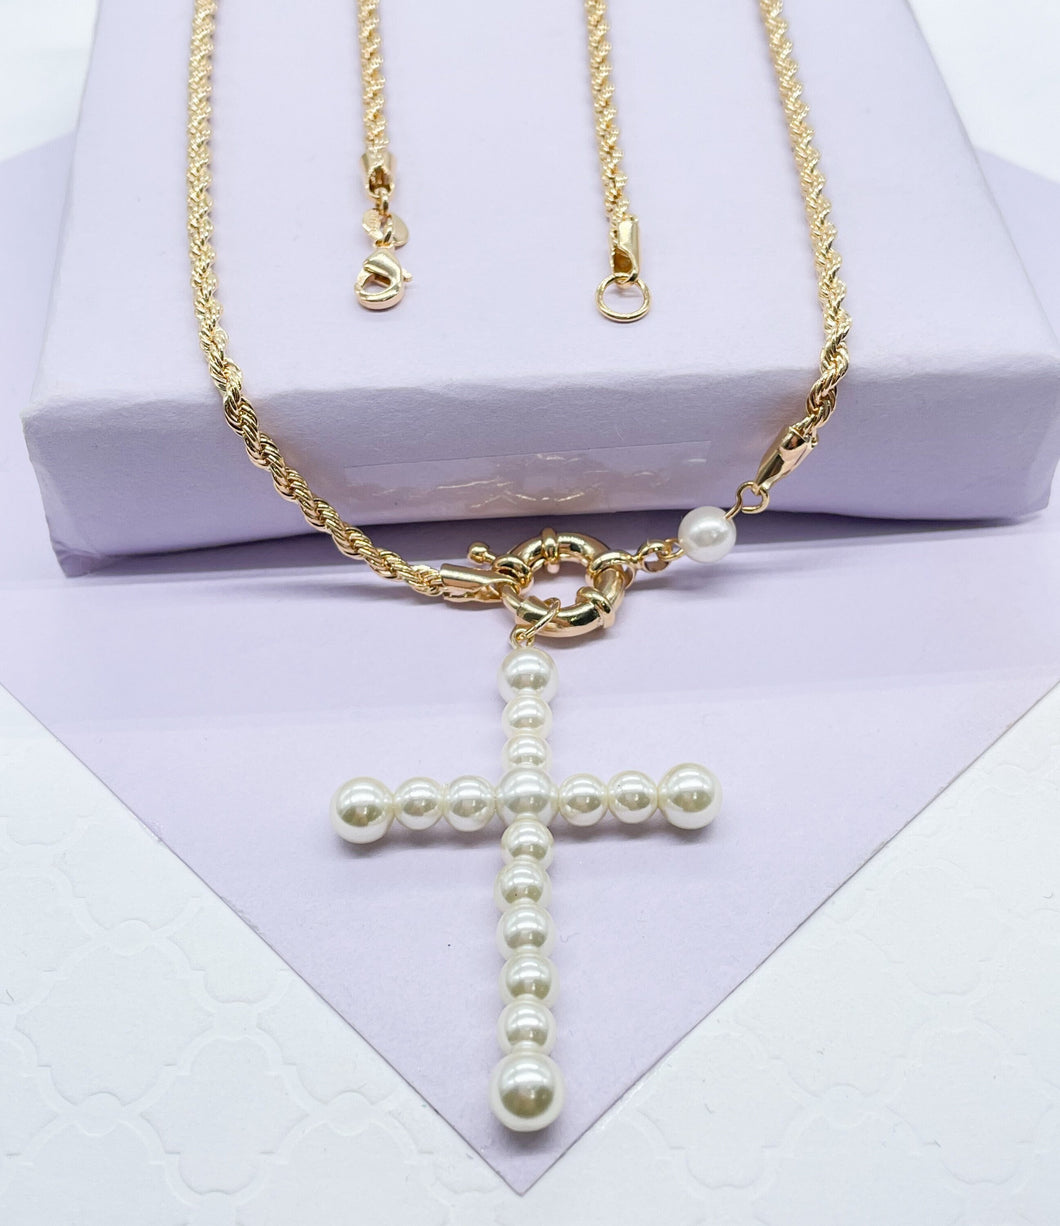 18k Gold Filled Rope Chain With Pearl Cross Center piece With Pearl Piece